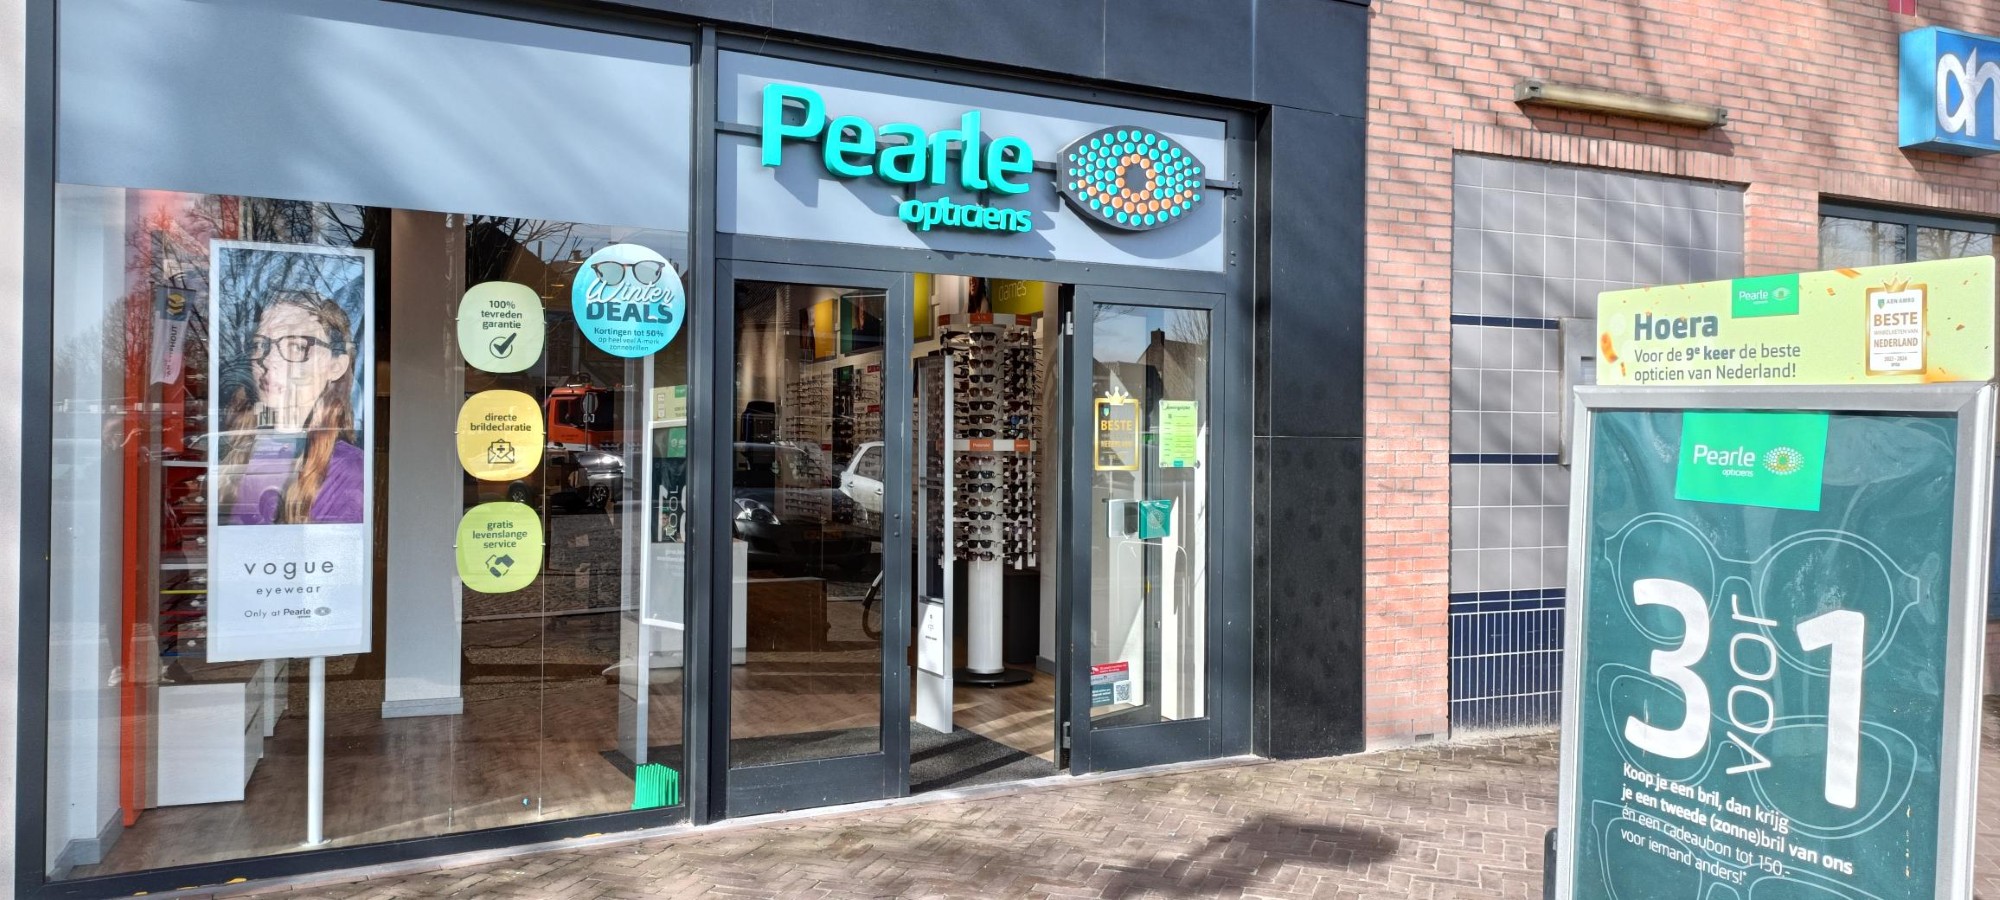 Pearle Opticiens Sint-Oedenrode